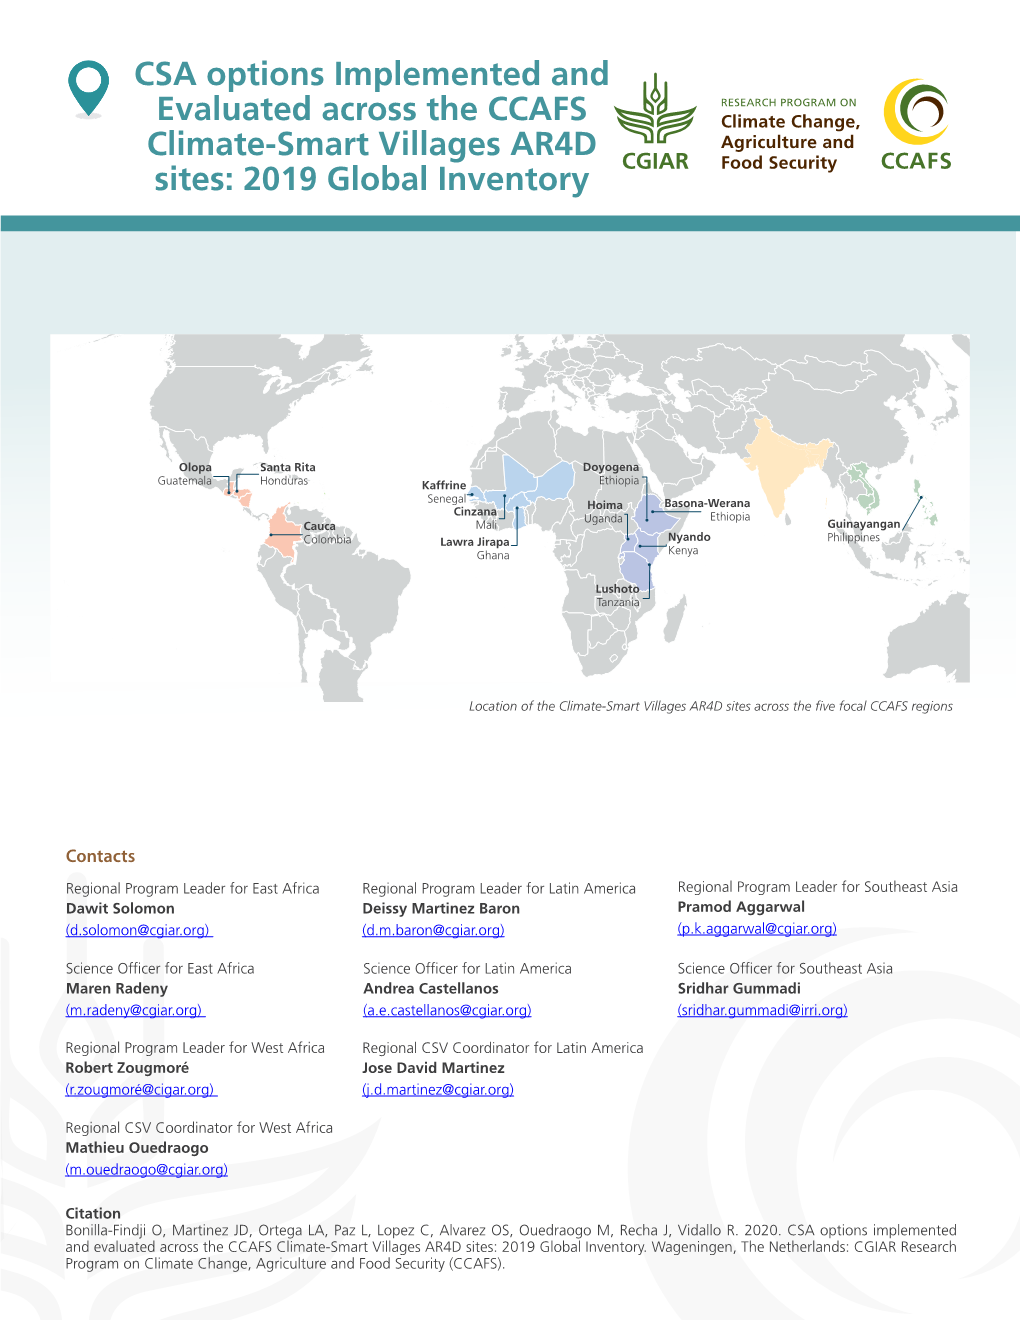 CSA Options Implemented and Evaluated Across the CCAFS Climate-Smart Villages AR4D Sites: 2019 Global Inventory